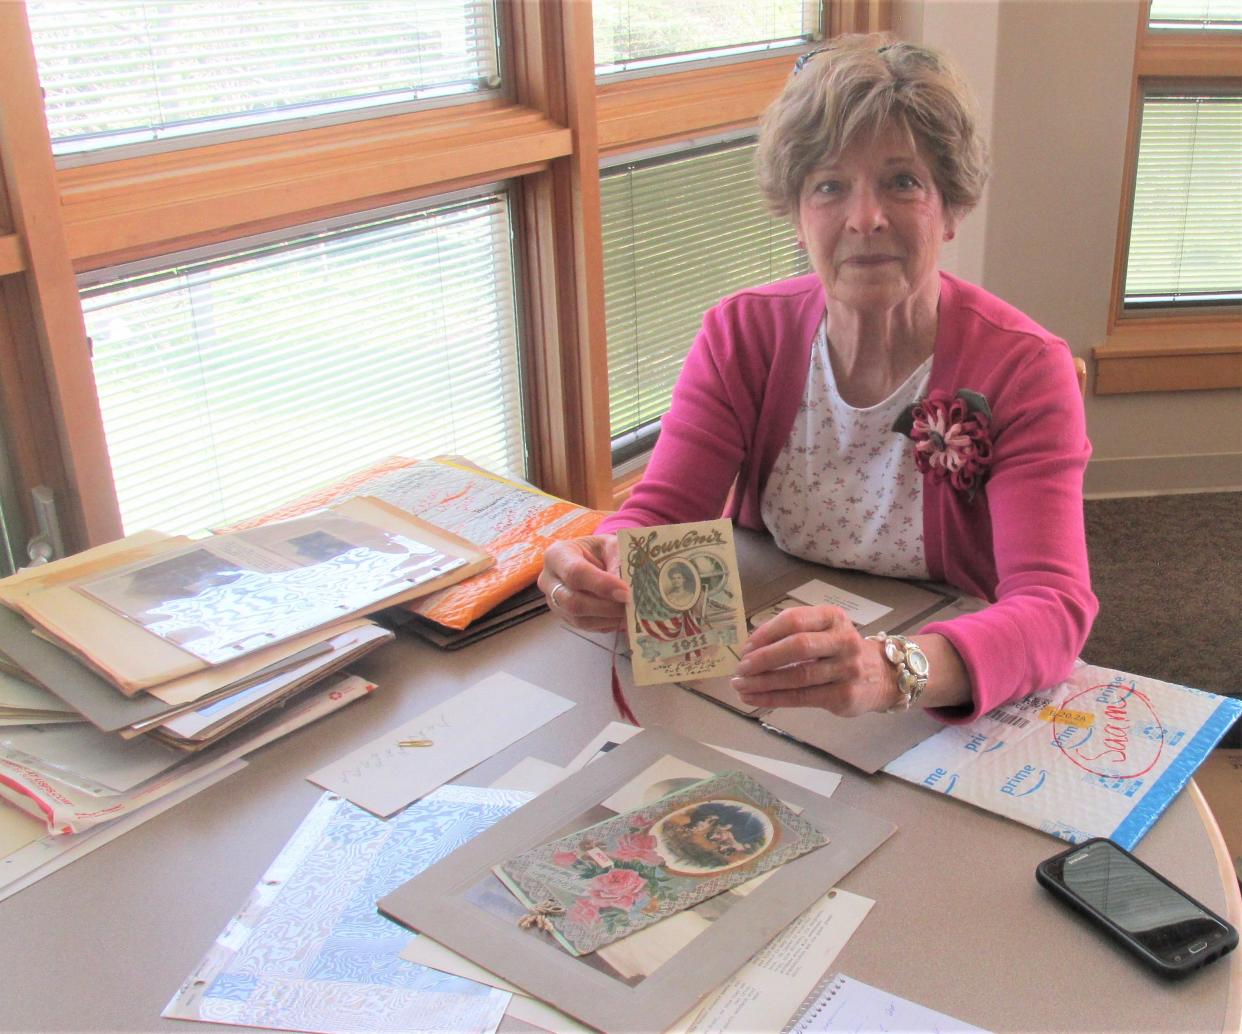 Polly Walgren displays a souvenir her grandmother Amelia Burkey gave to her graduates from the Class of 1911. Burkey taught for two years at South Bunker Hill School,  an old one-room schoolhouse on County Road 77 in Holmes County near Berlin.